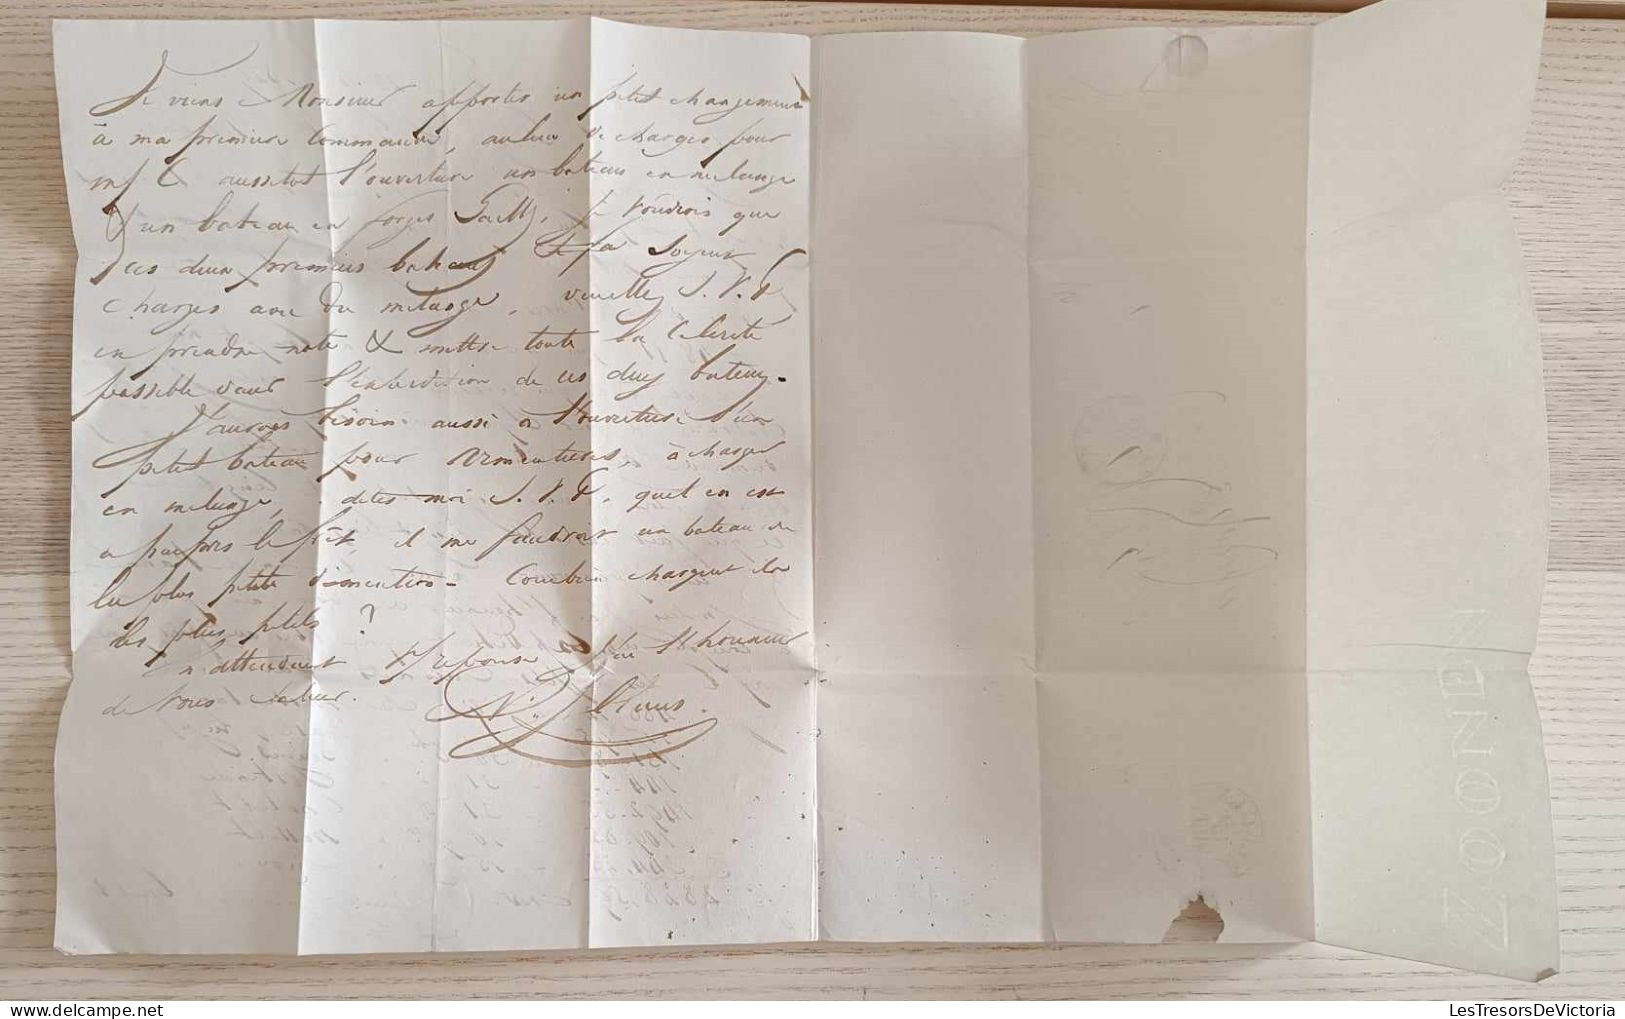 Letter mailed on october 13th 1829 from Gent to Hornu  - Weight indication "16" wigtjes